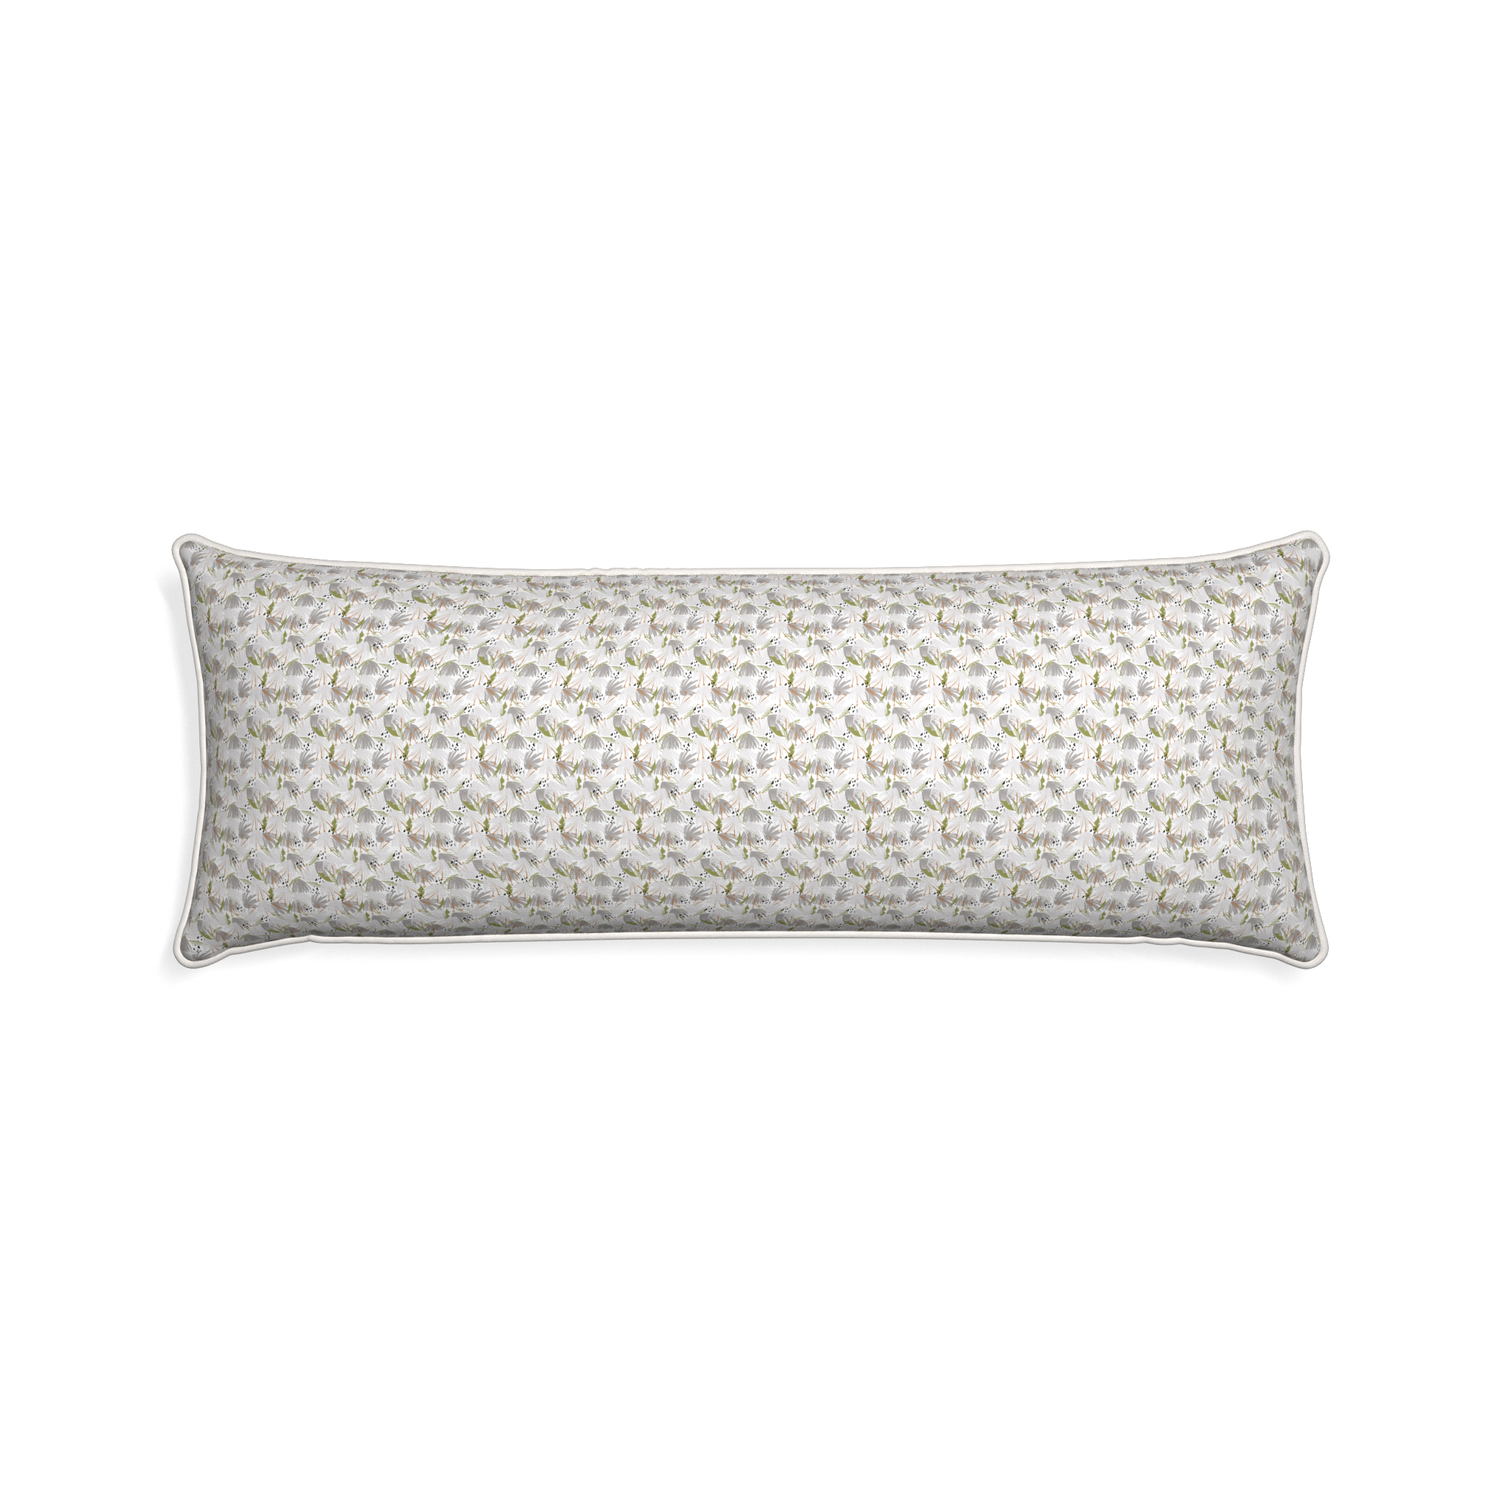 Xl-lumbar eden grey custom pillow with snow piping on white background